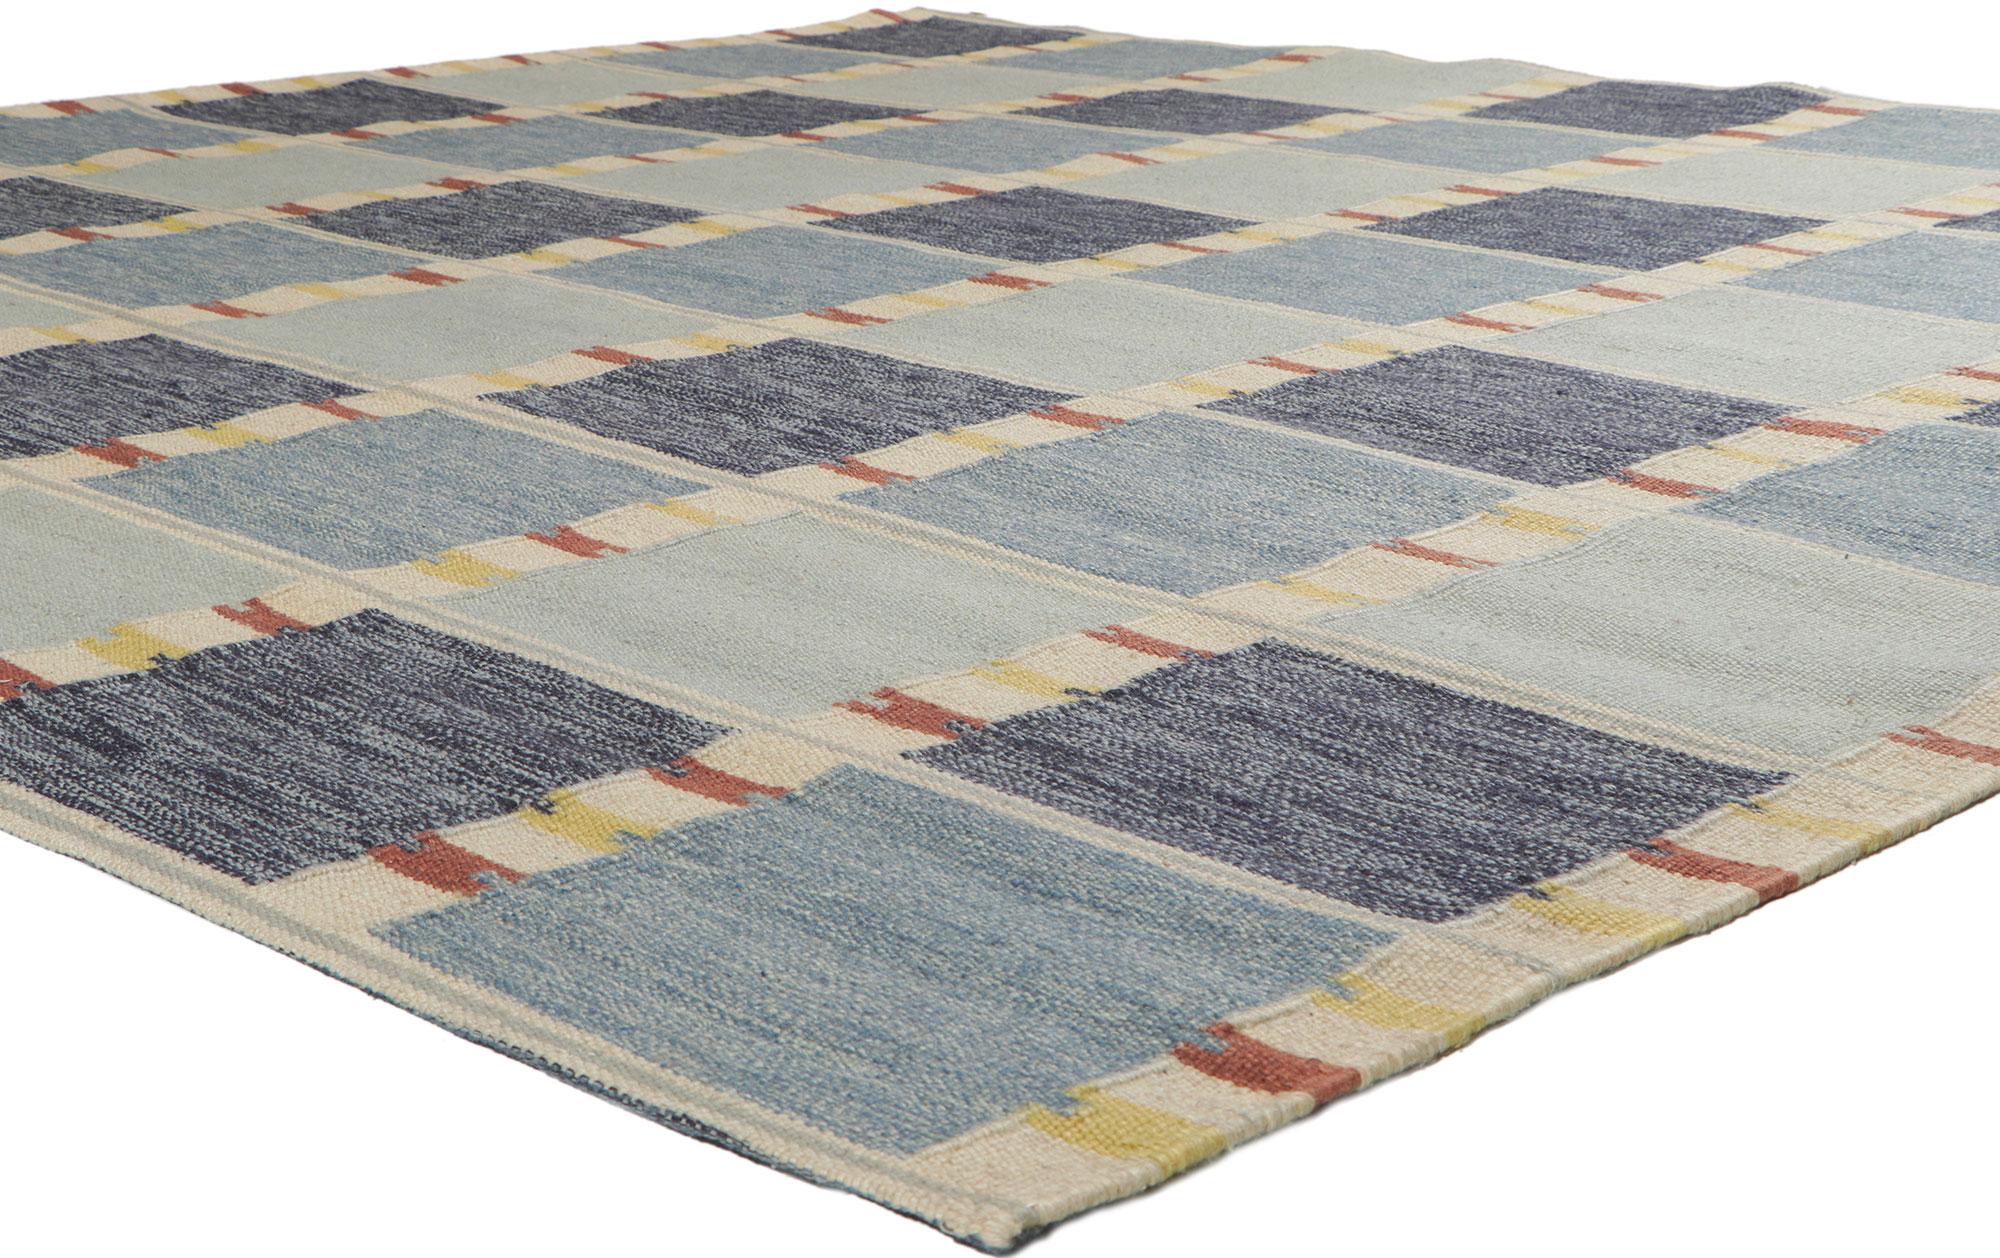 30857 New Barbro Nilsson Swedish Inspired Rug, 09'11 x 10'05. Emanating Scandinavian Modern style with incredible detail and texture, this handwoven Swedish style kilim rug is a captivating vision of woven beauty. The eye-catching check pattern and